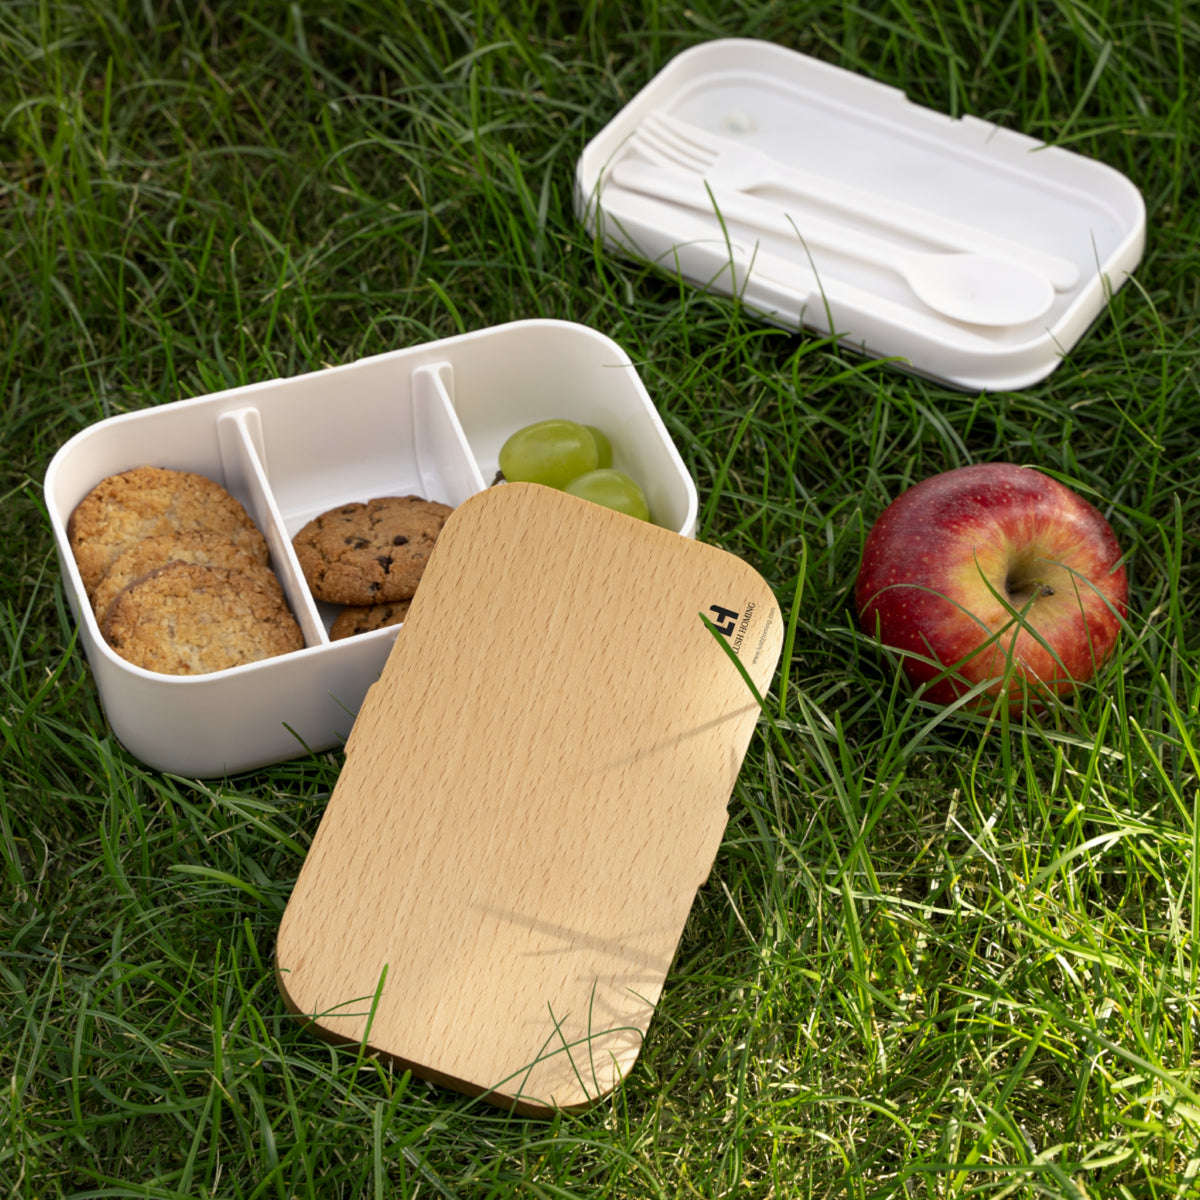 Bento Lunch Box and some cookies and fruits in it